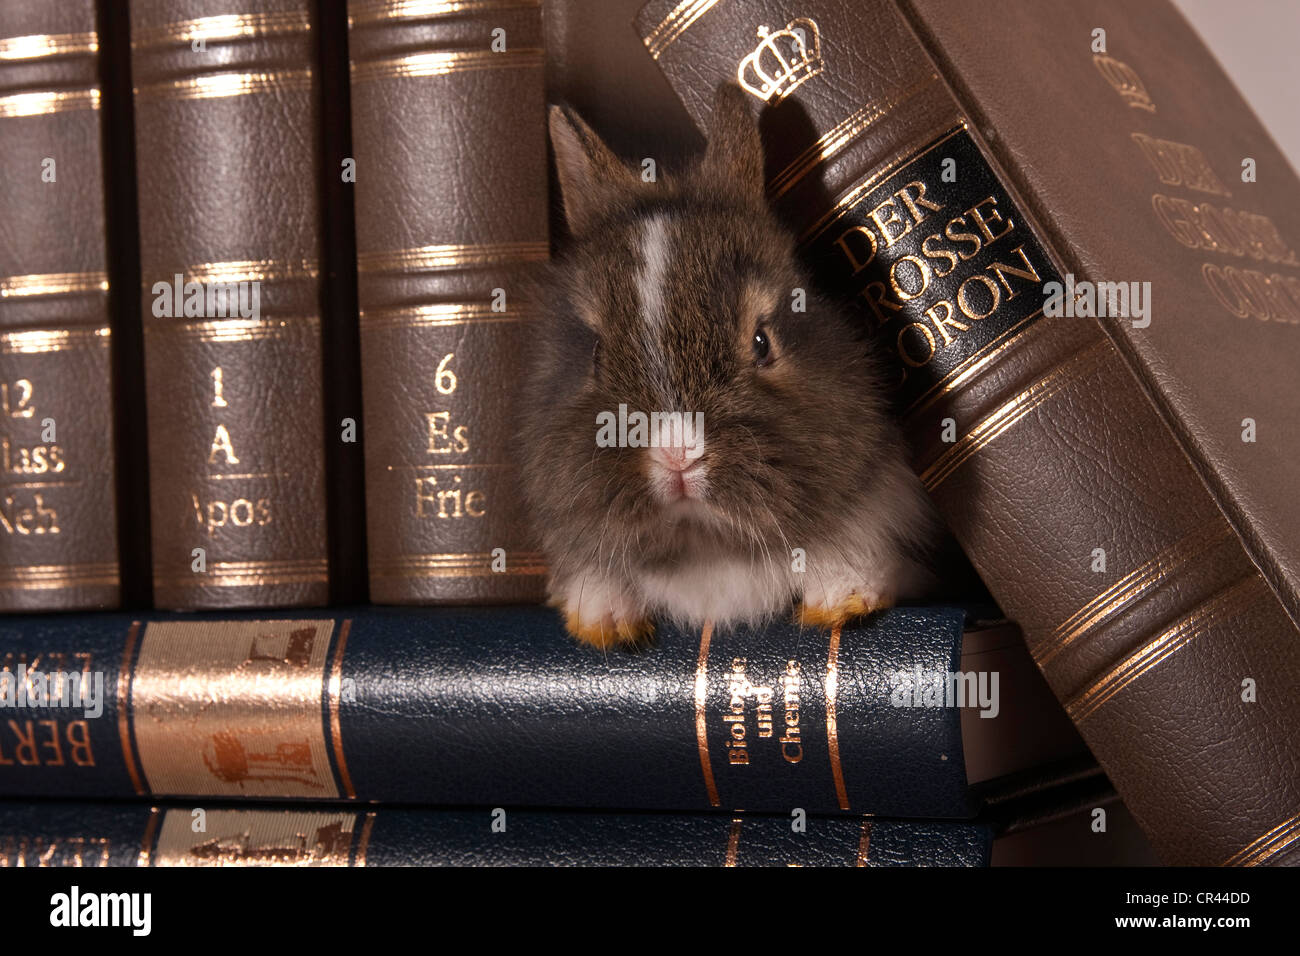 Young dwarf rabbit between leather-bound volumes Stock Photo